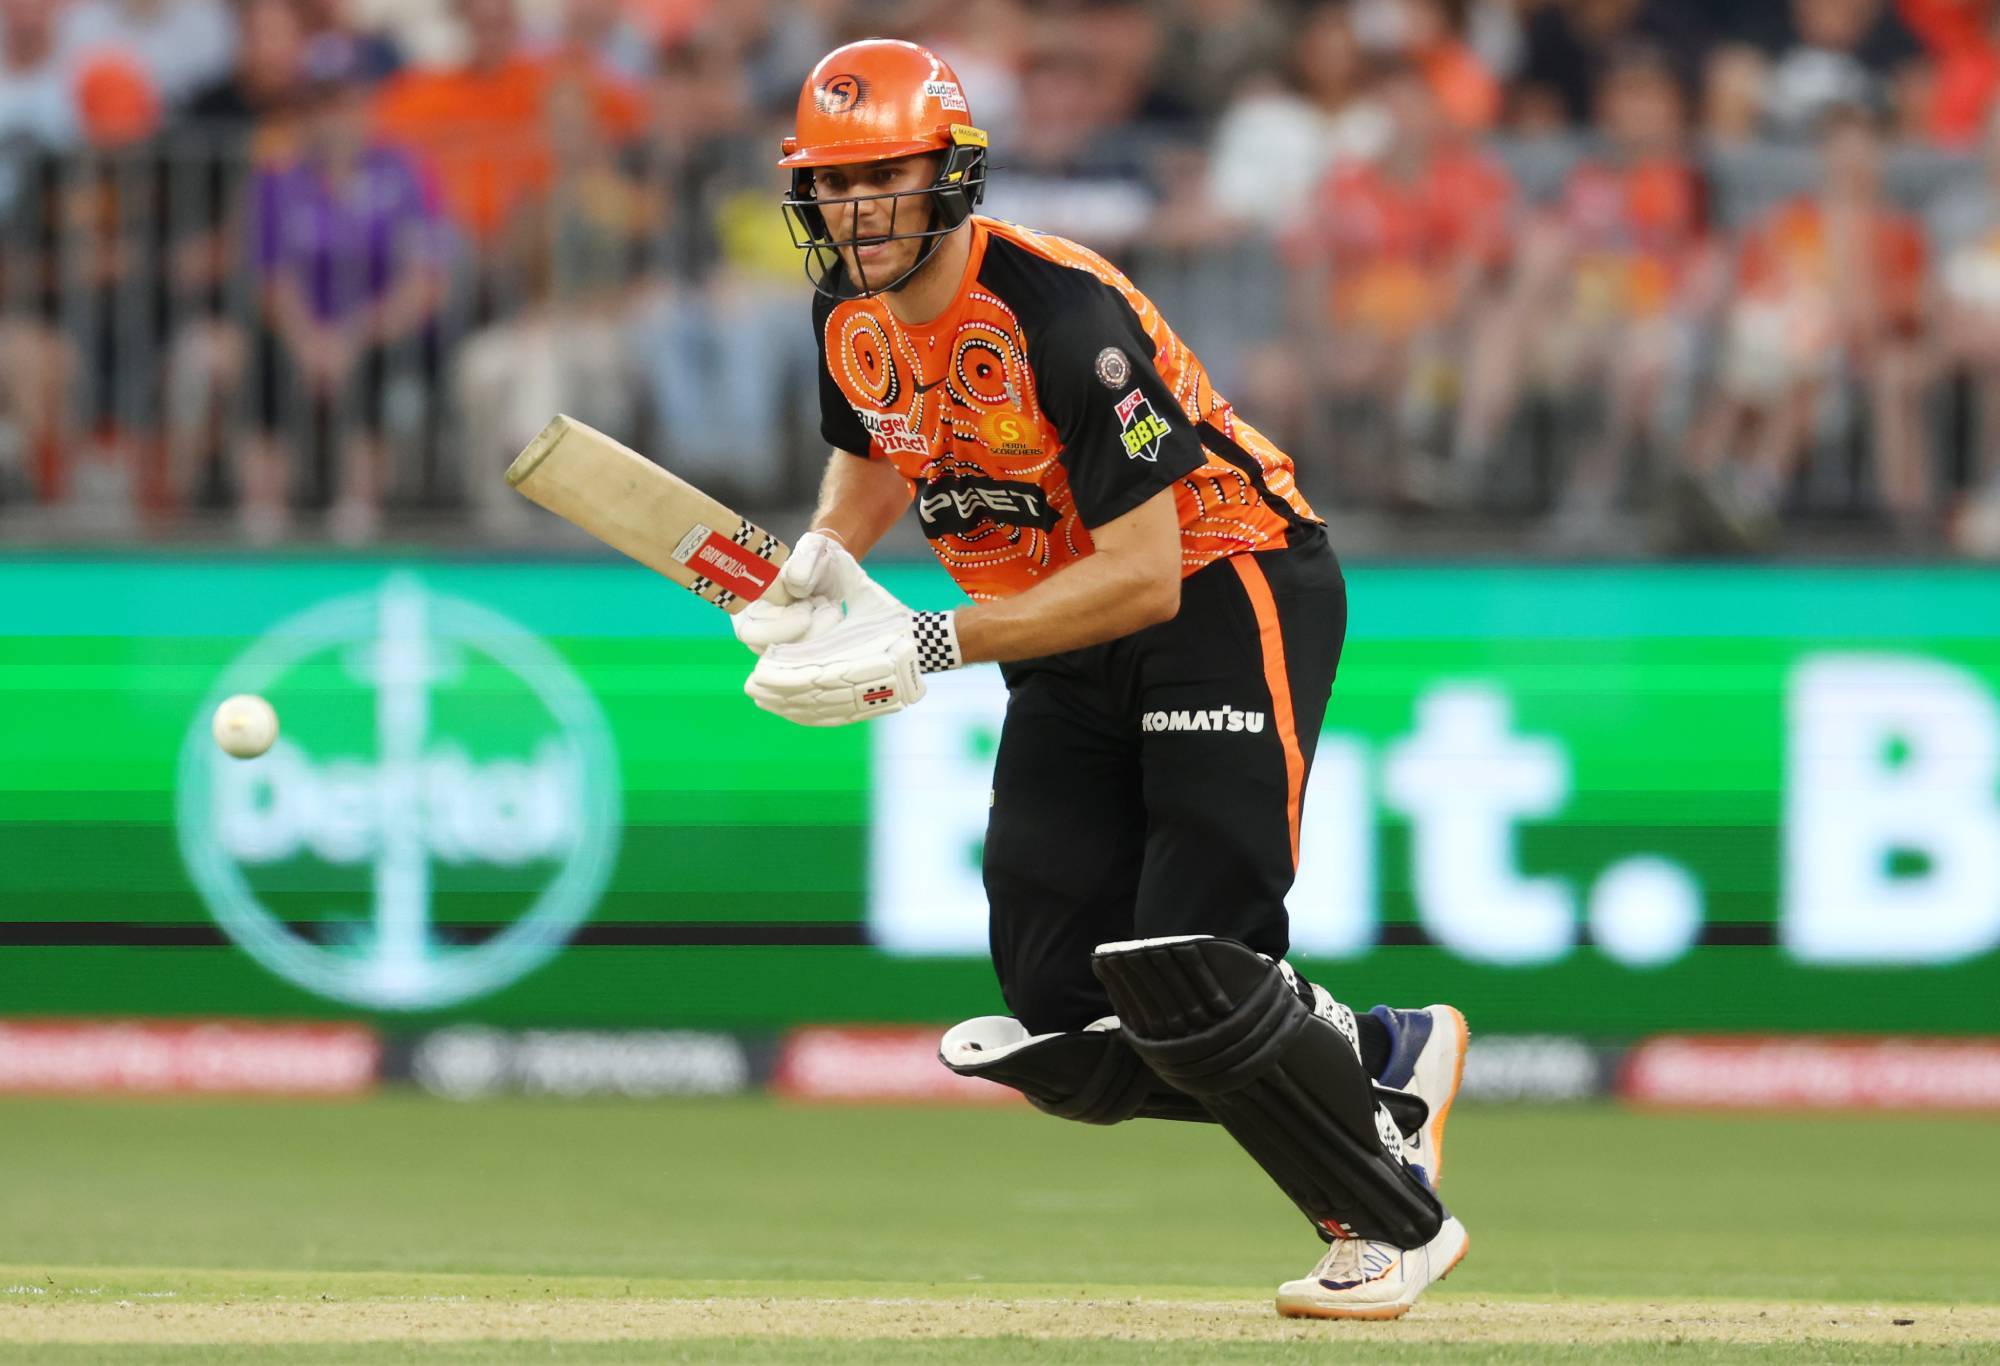 PERTH, AUSTRALIA - JANUARY 18: Aaron Hardie of the Scorchers bats during the Men's Big Bash League match between the Perth Scorchers and the Hobart Hurricanes at Optus Stadium, on January 18, 2023, in Perth, Australia. (Photo by Will Russell - CA/Cricket Australia via Getty Images)